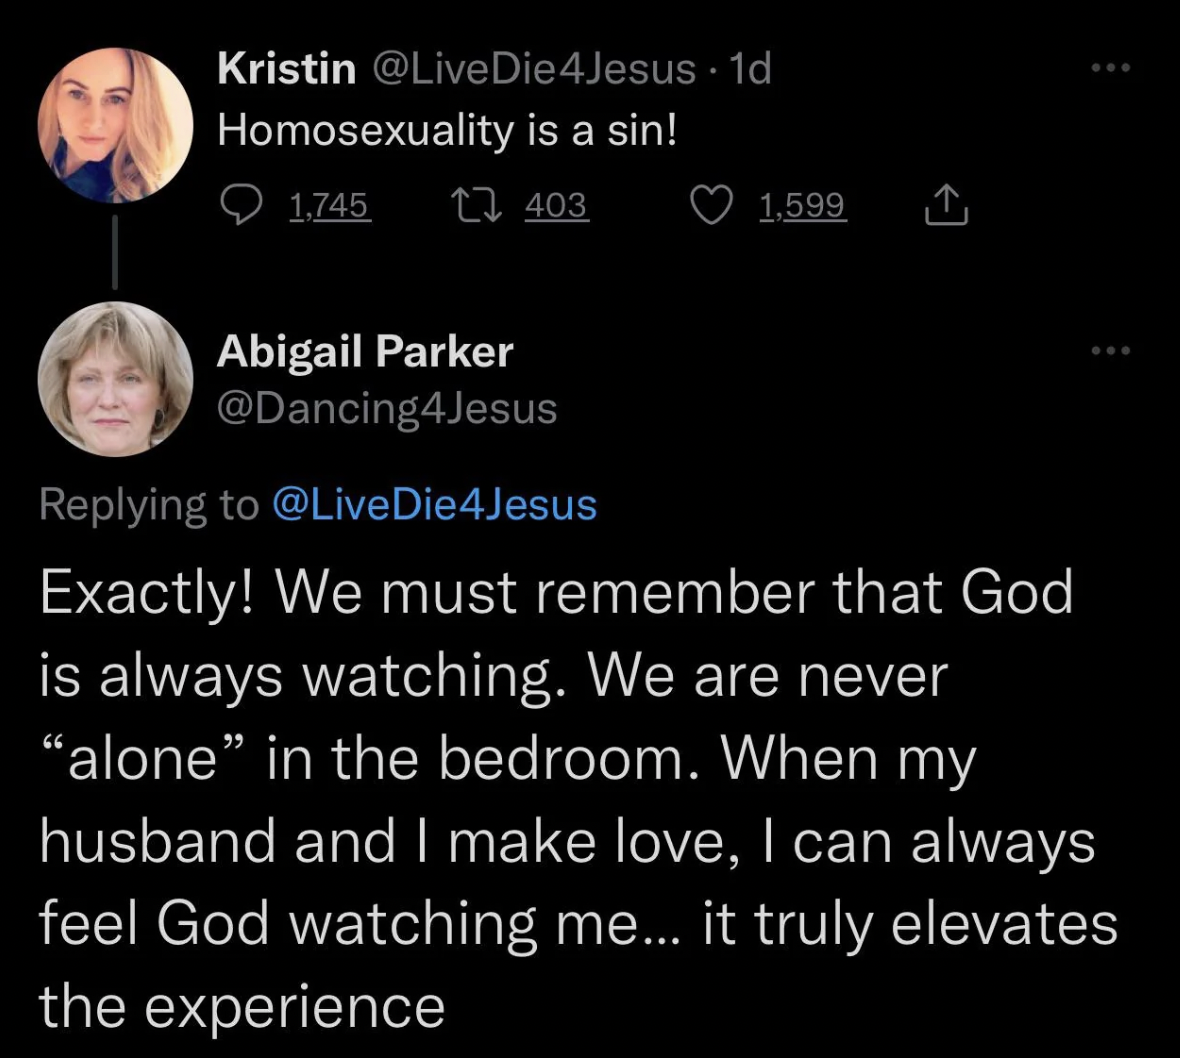 atmosphere - Kristin . 1d Homosexuality is a sin! 1,745 403 Abigail Parker 1,599 Exactly! We must remember that God is always watching. We are never "alone" in the bedroom. When my husband and I make love, I can always feel God watching me... it truly ele